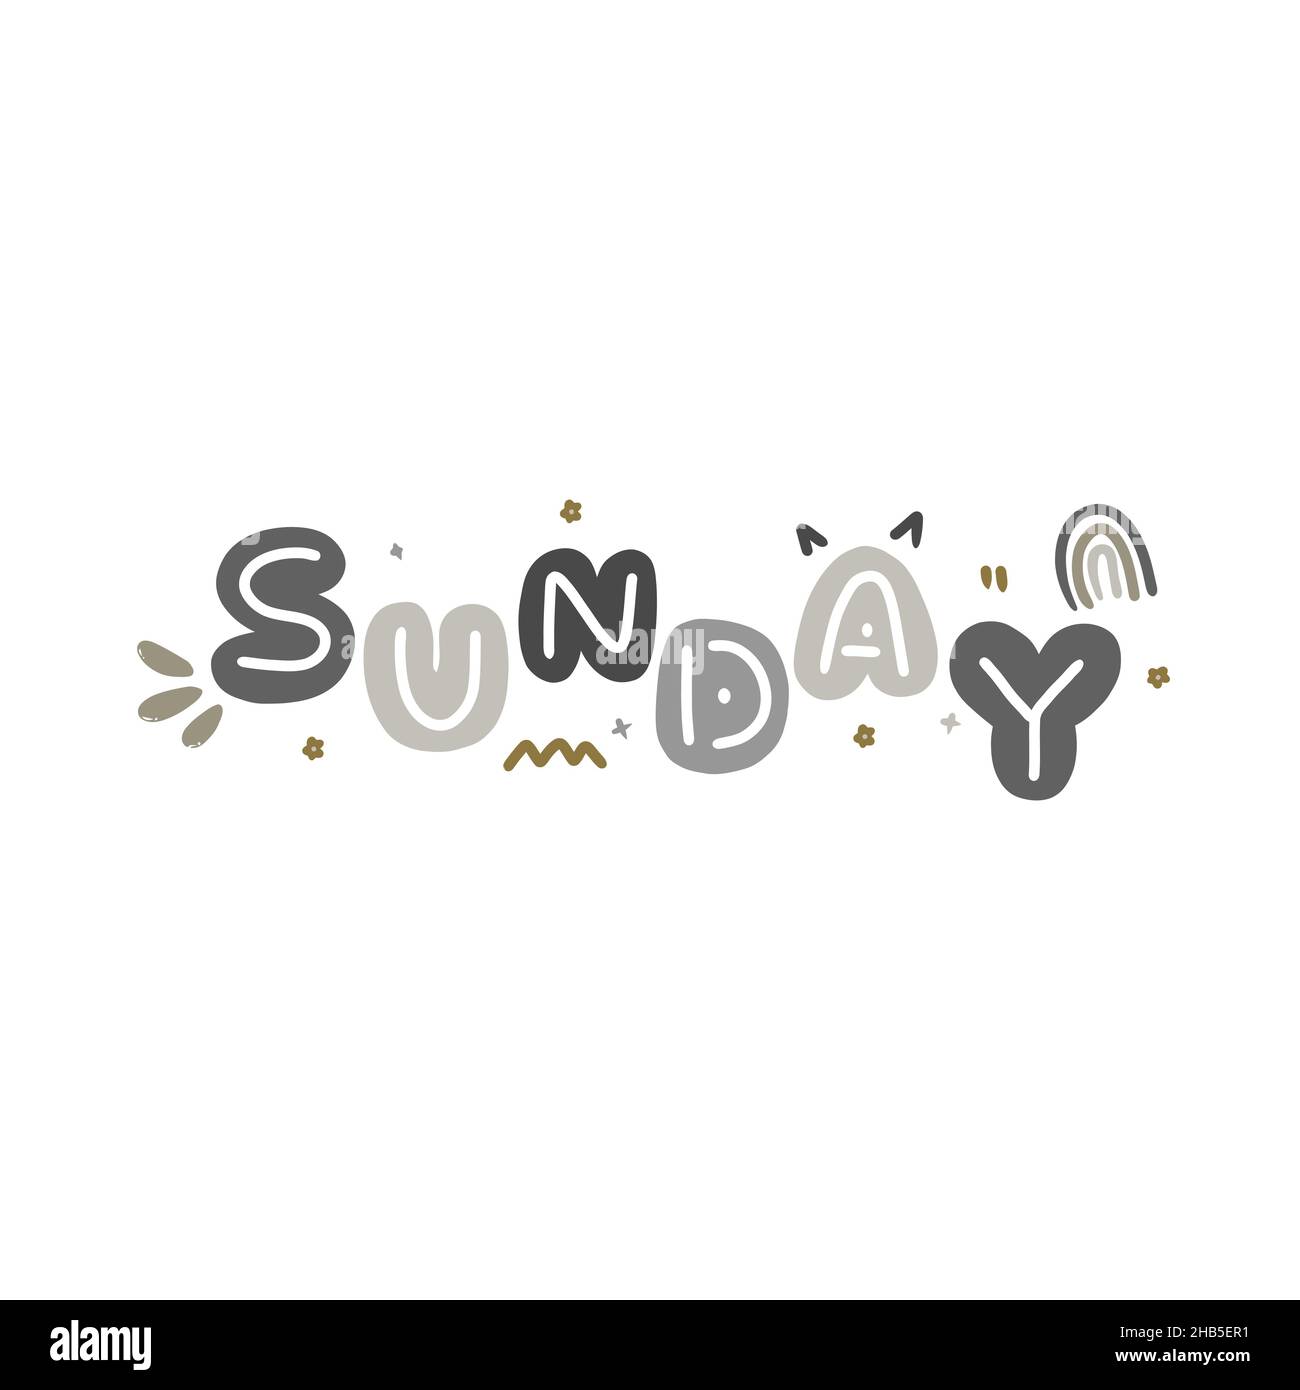 Awesome Sonntag Wochenende Typografie Doodle Vector Stock Vektor